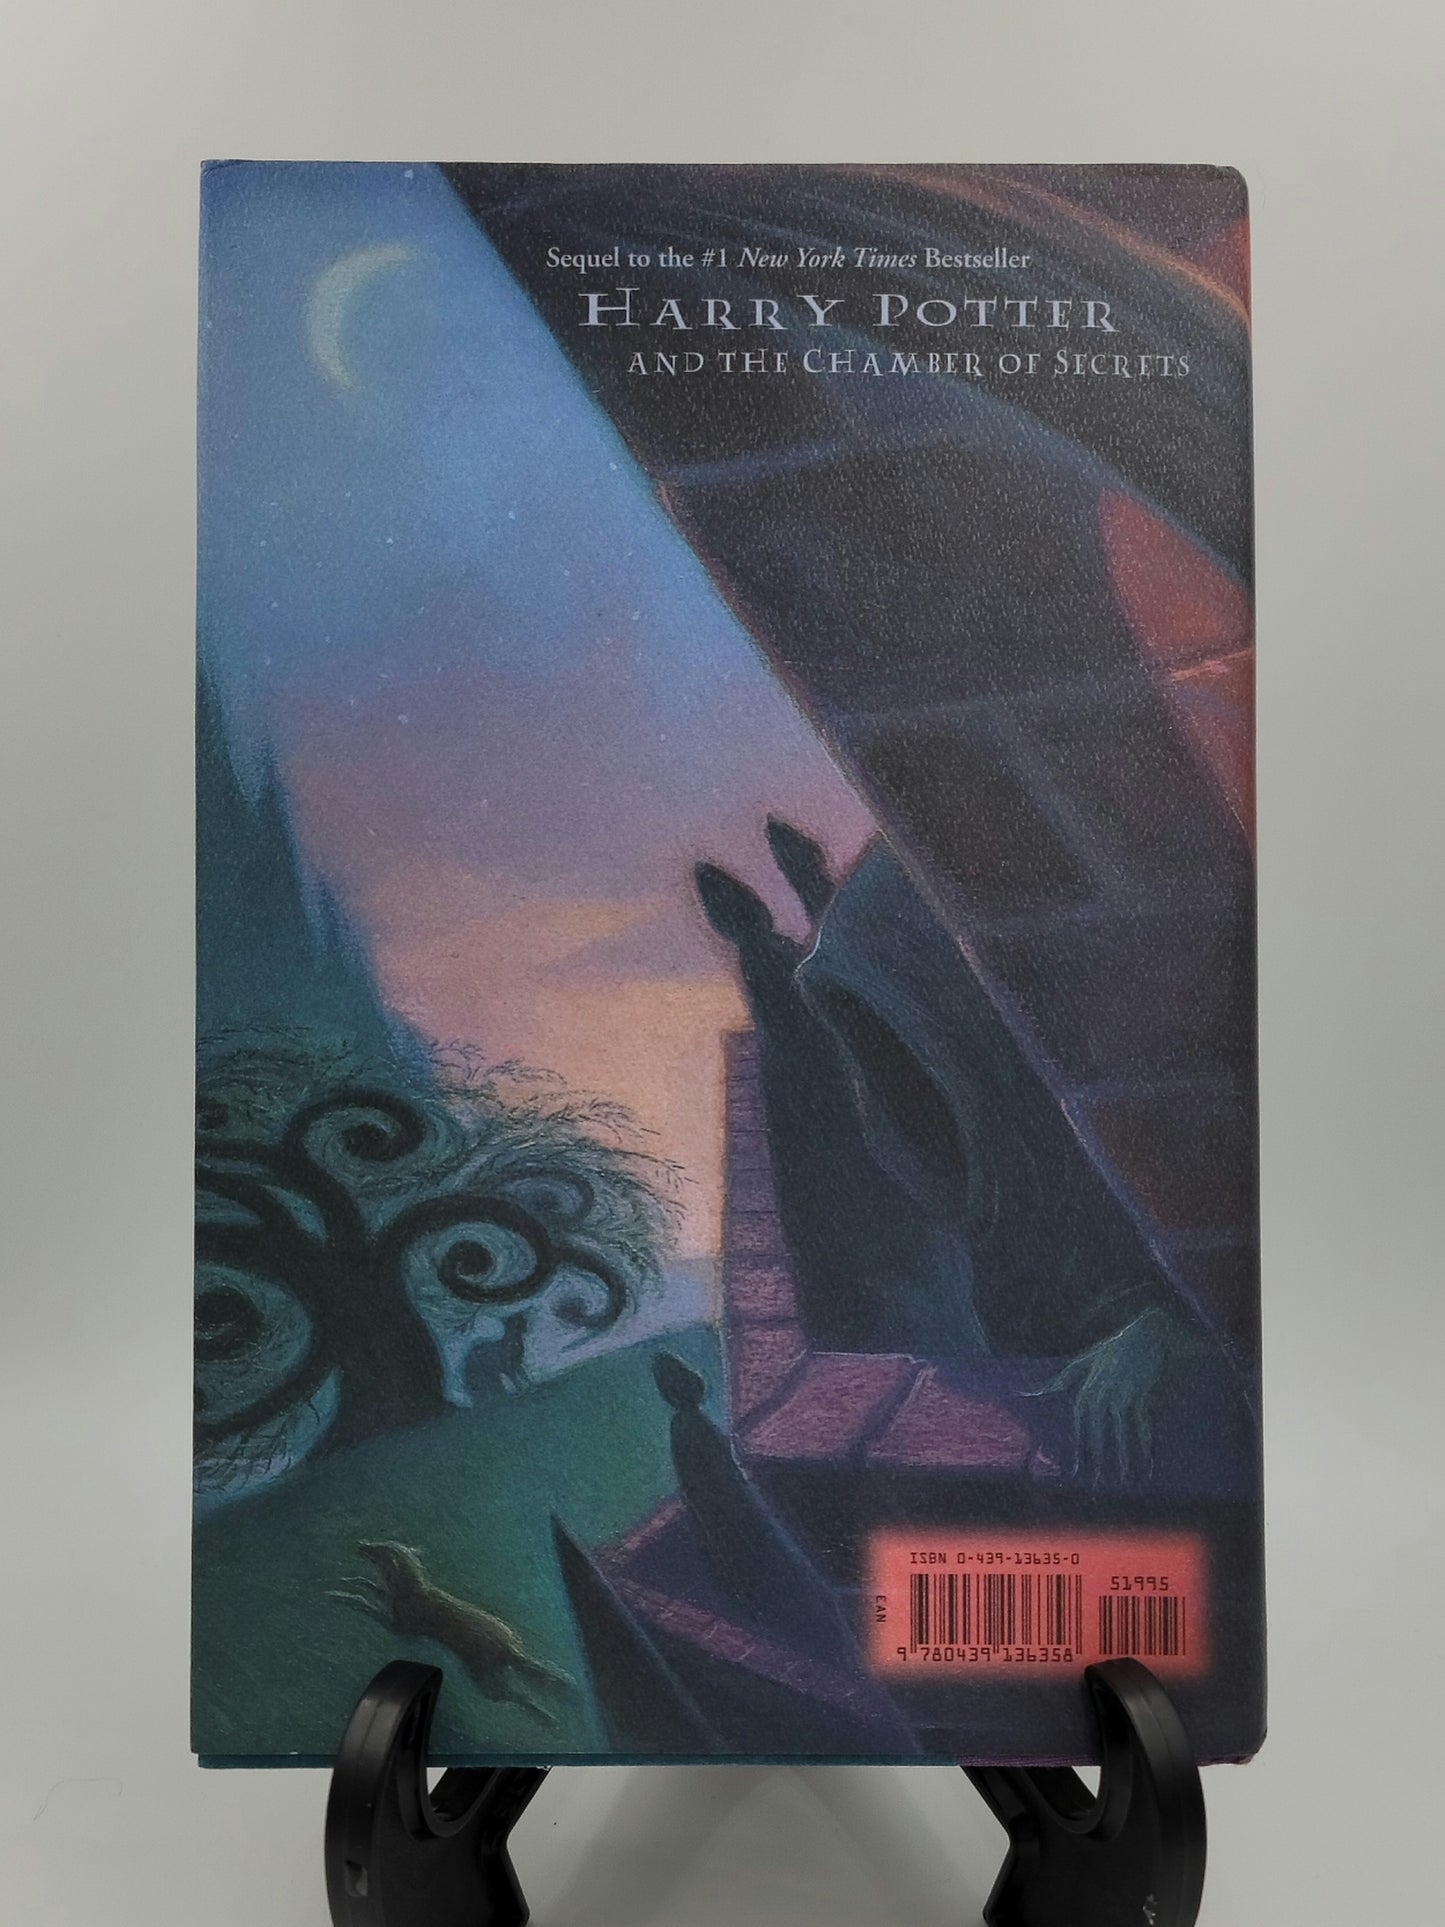 Harry Potter and the Prisoner of Azkaban By: J. K. Rowling (Harry Potter Series #3)